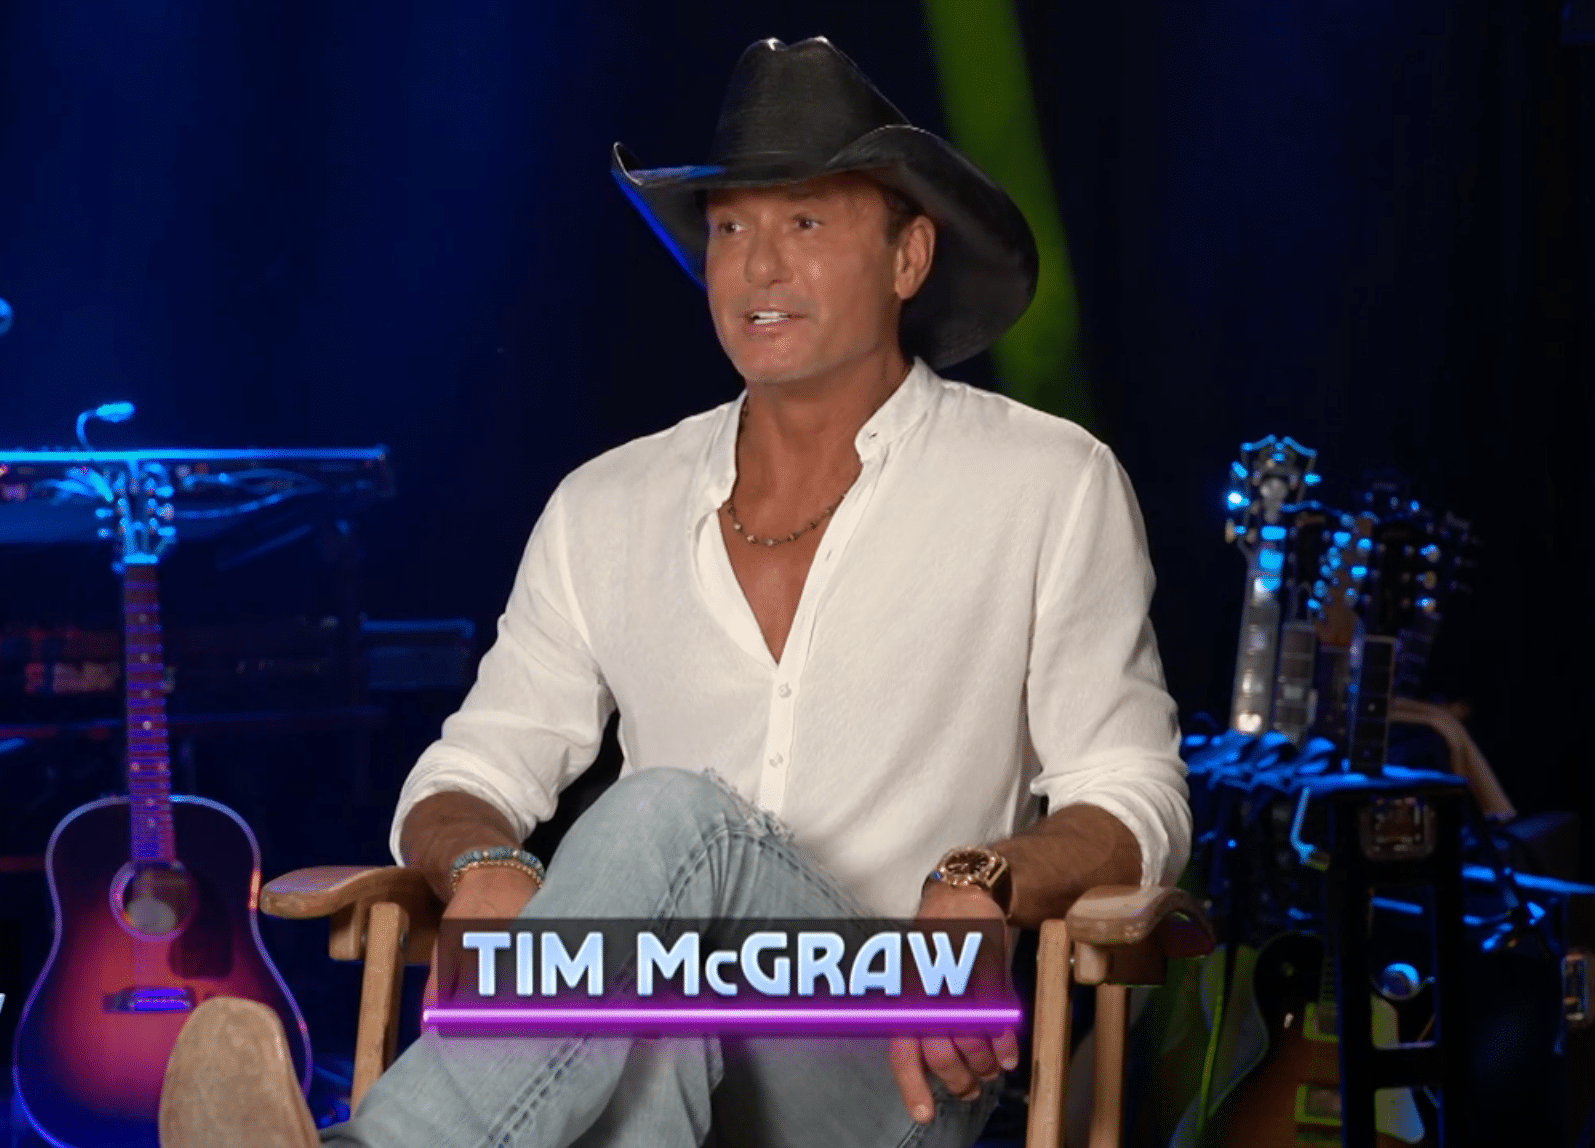 Tim McGraw sits down with Entertainment Television to talk about his tour and his family life.